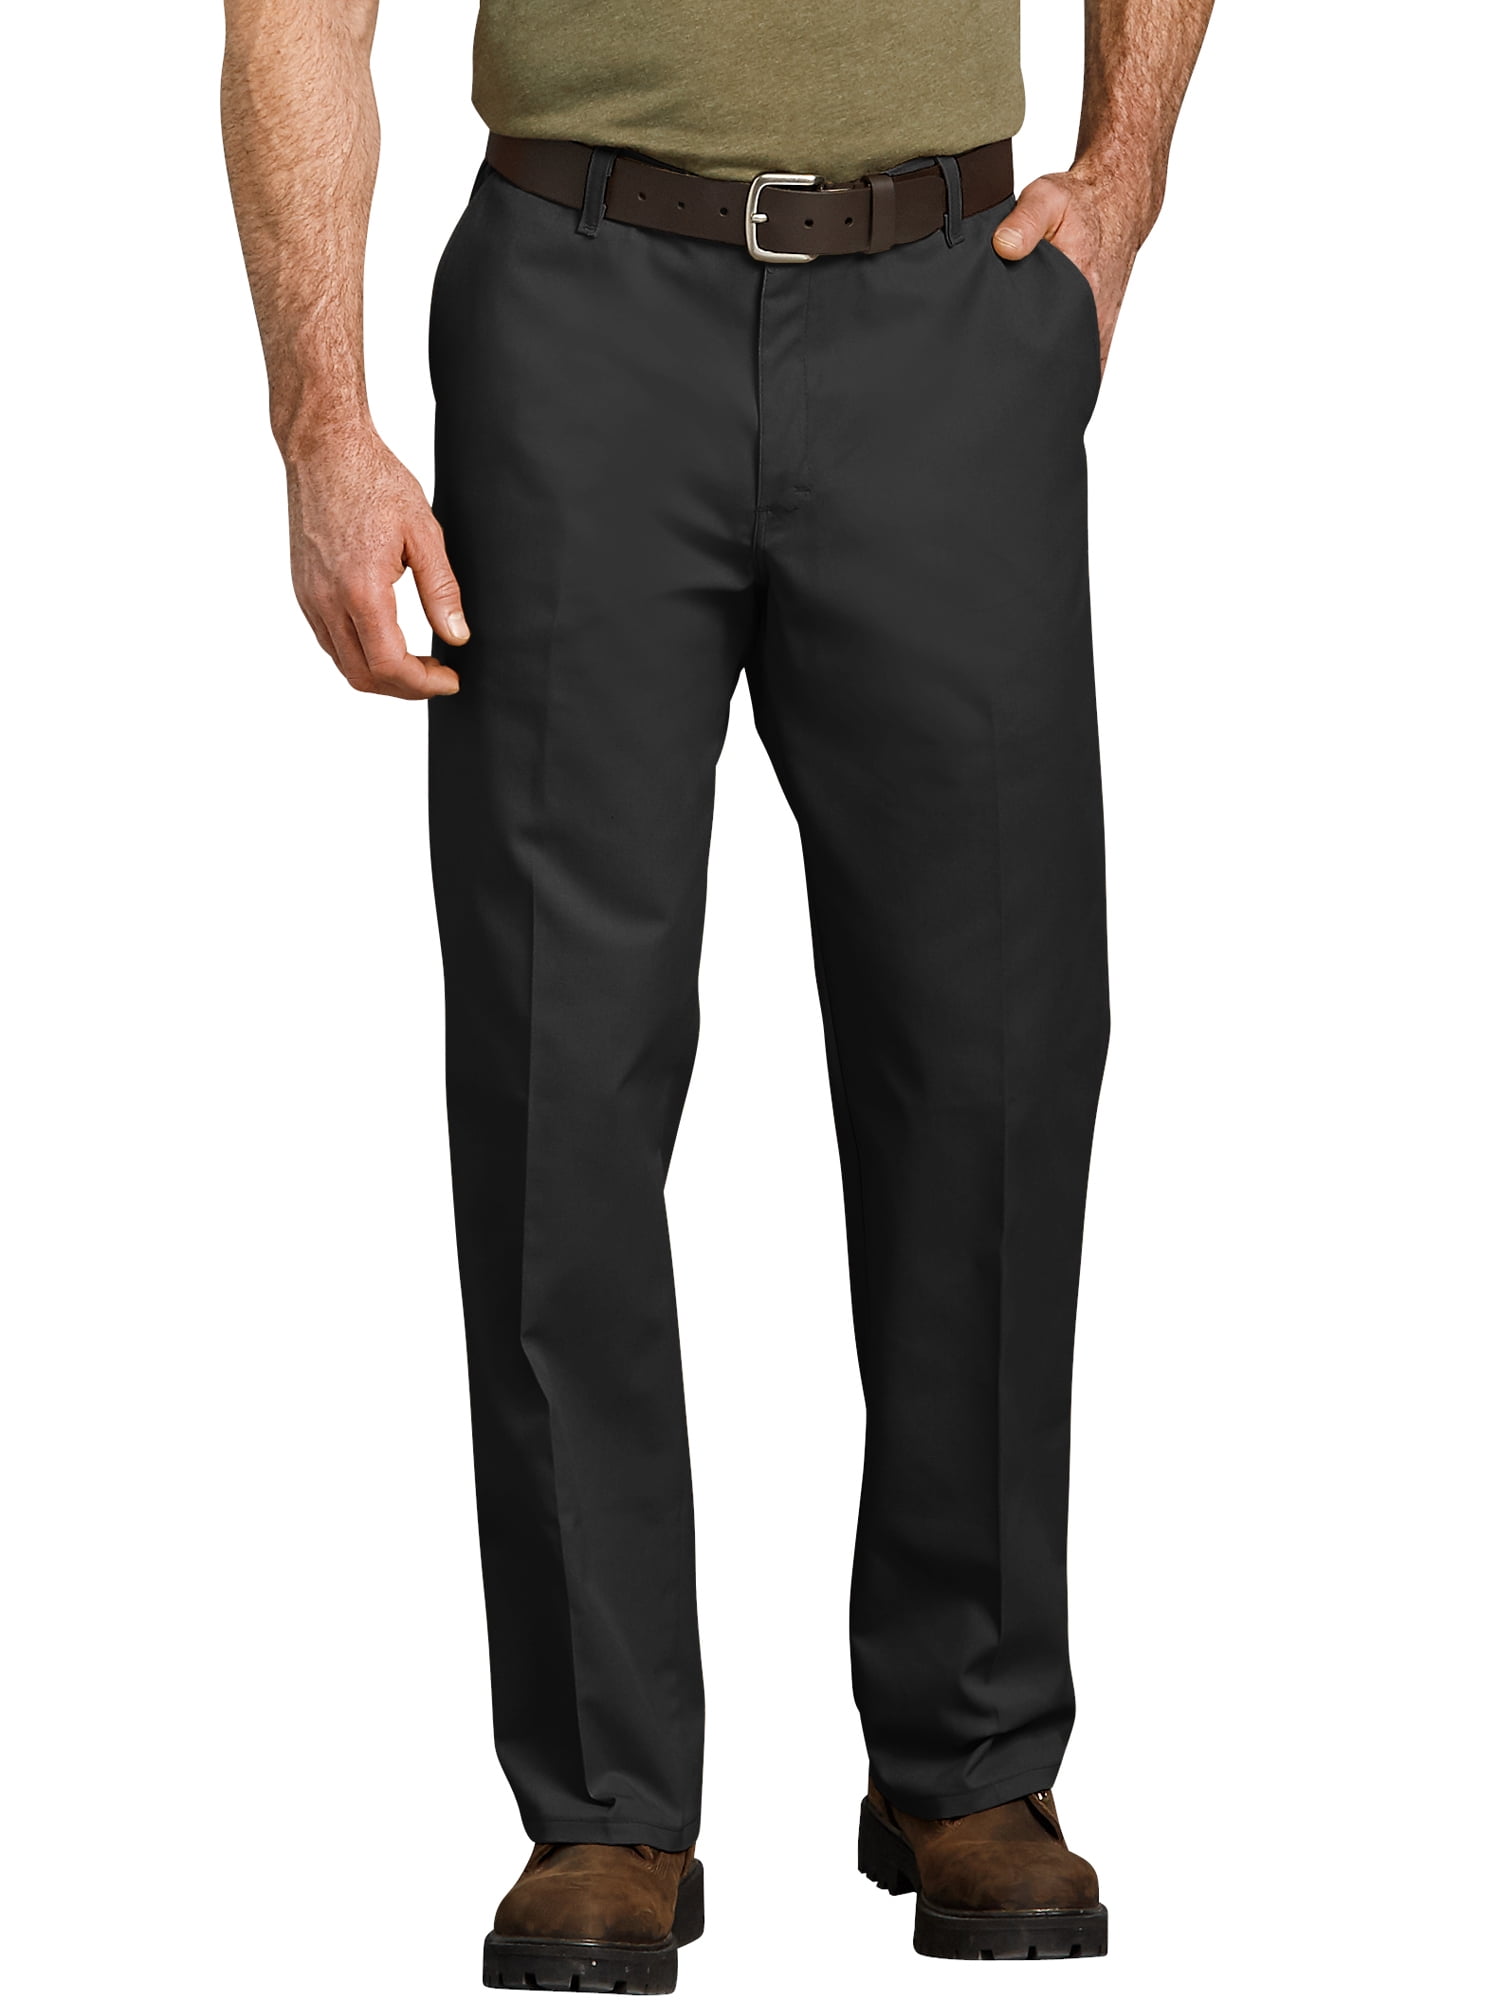 Genuine Dickies Mens Relaxed Fit Straight Leg Front Flex Pant - Walmart.com